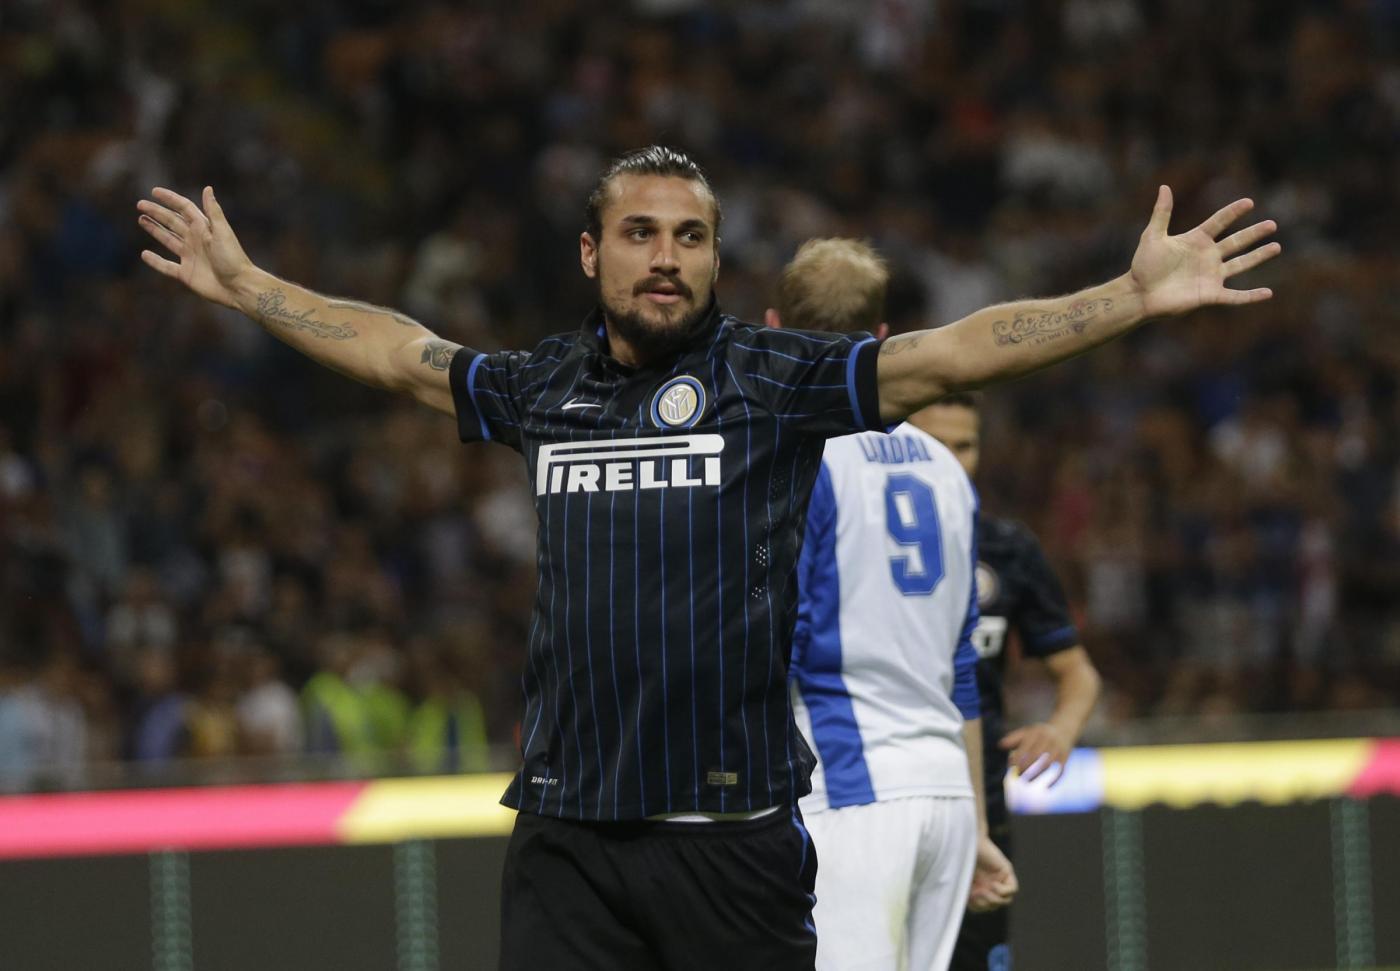 Olé: The Osvaldo Situation Will Now Be Solved on Tuesday